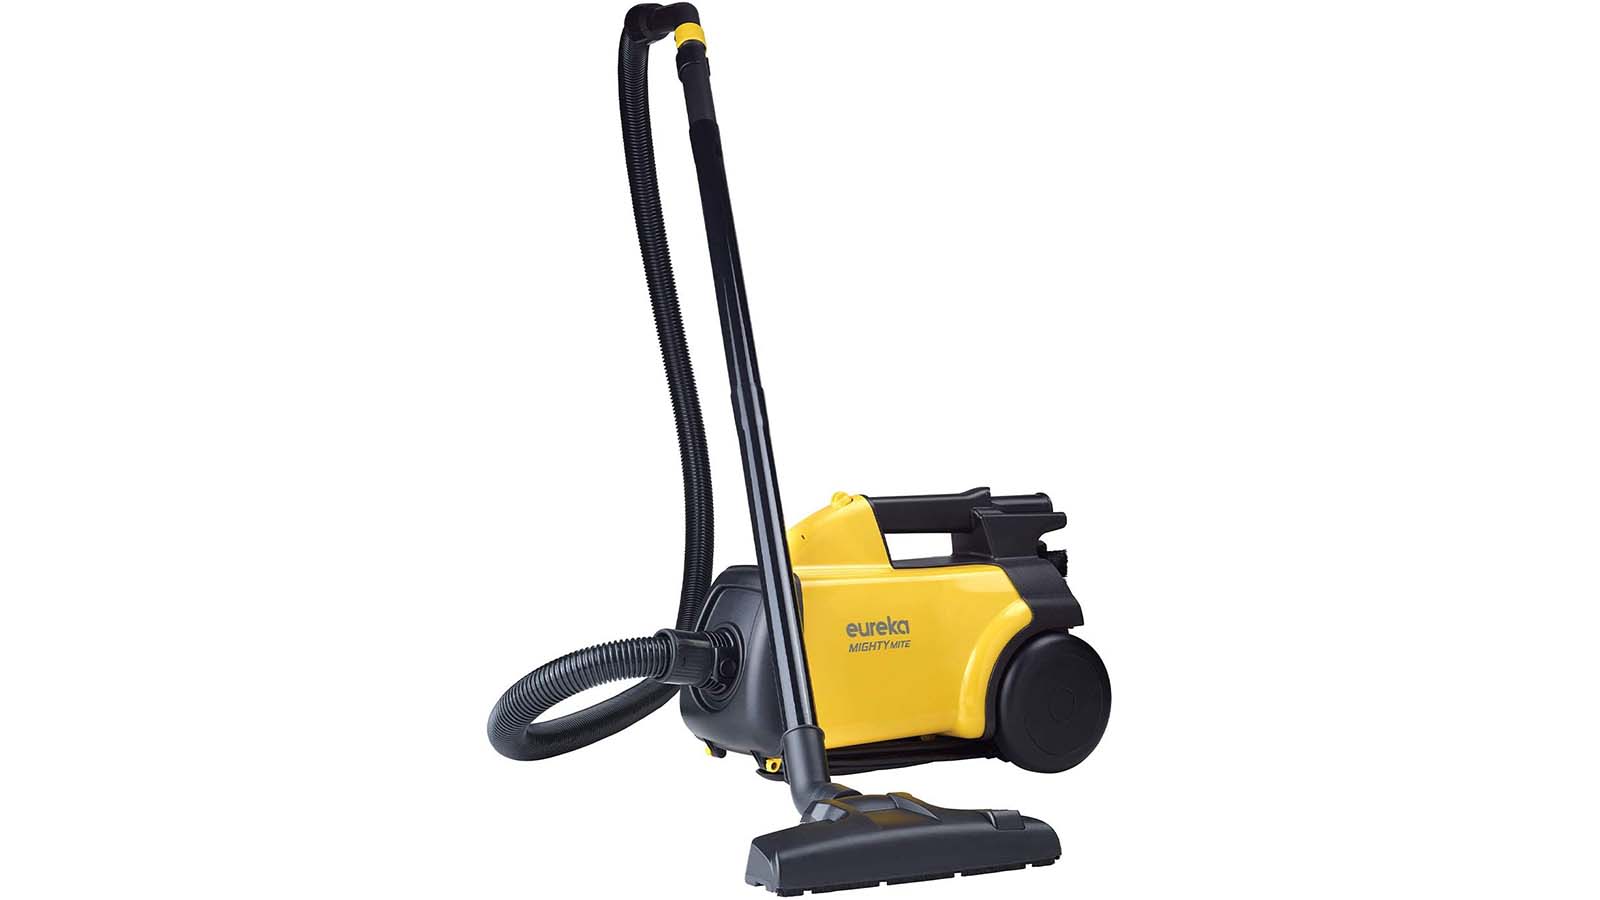 The Best Canister Vacuums In 2021 Cnn, Best Canister Vacuum For Hardwood Floors